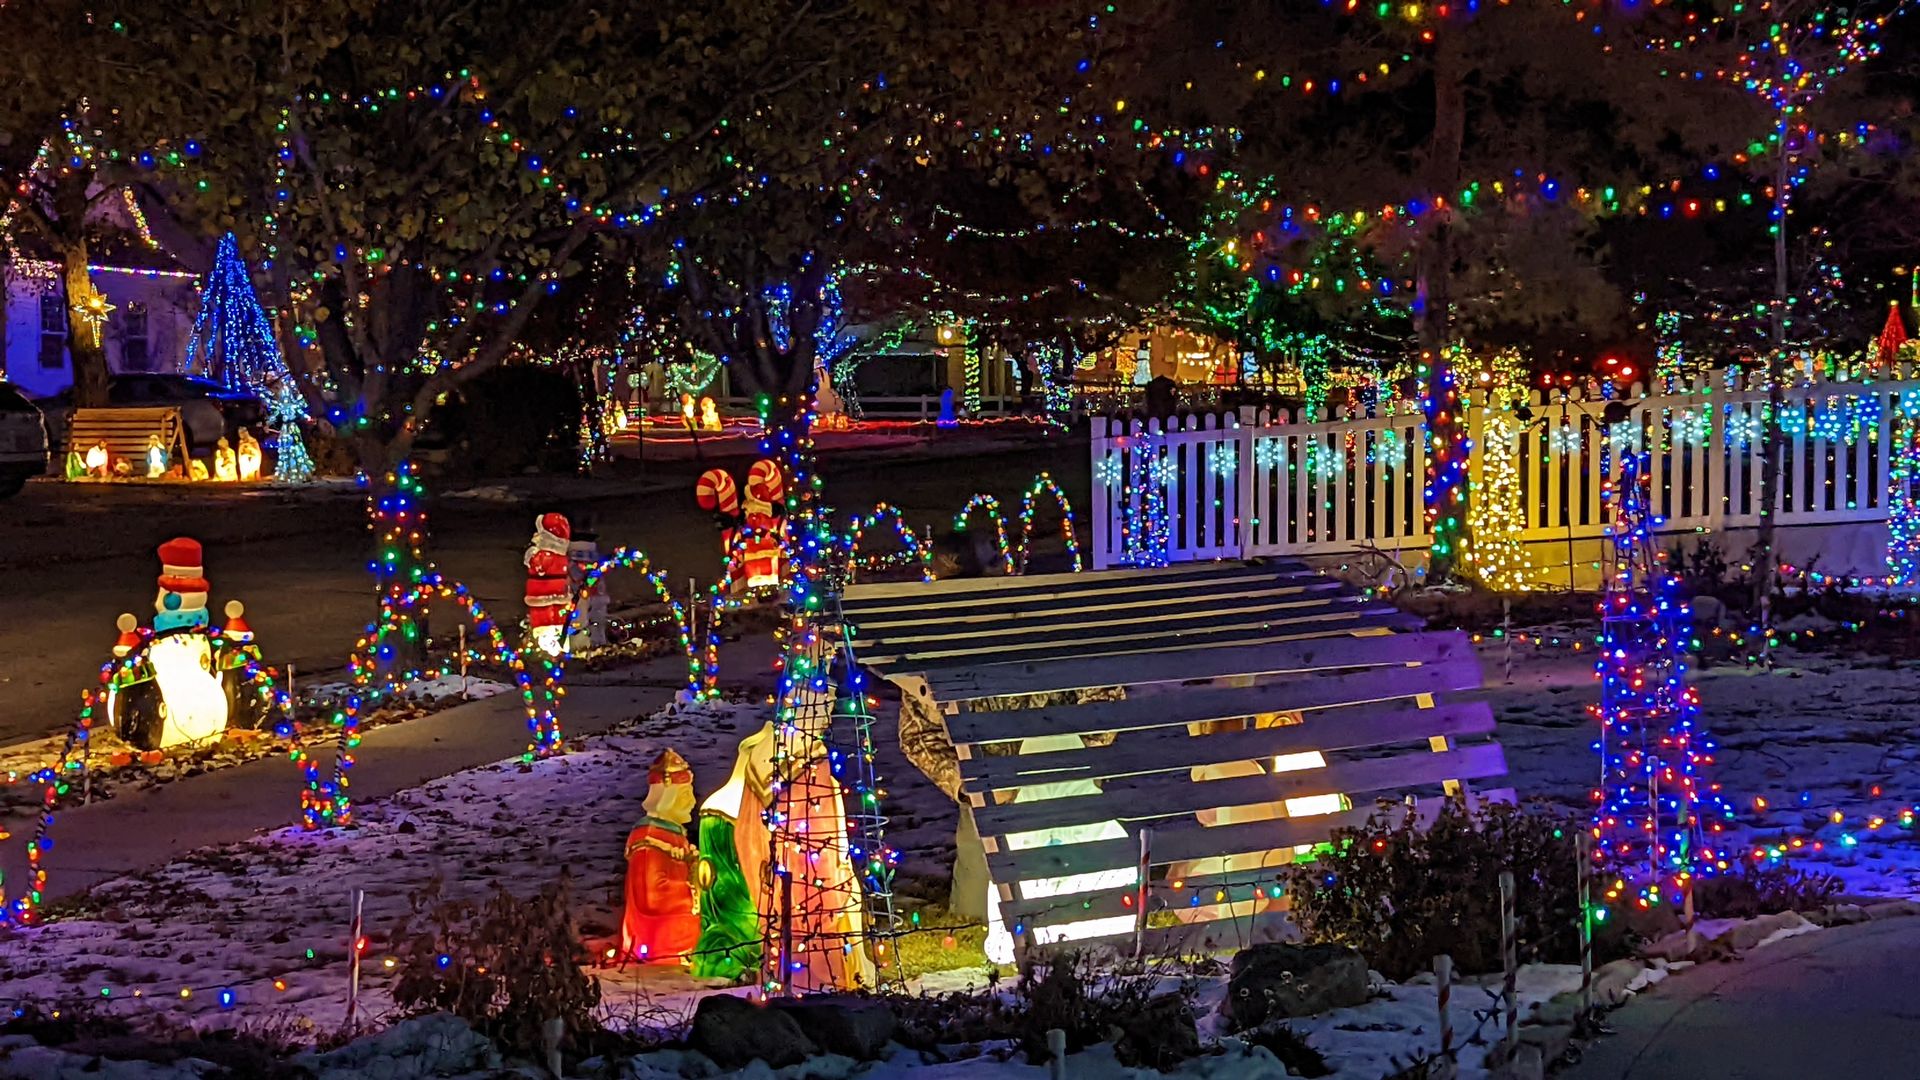 A light-up manger scene stands in a front yard in a neighborhood covered with Christmas lights.